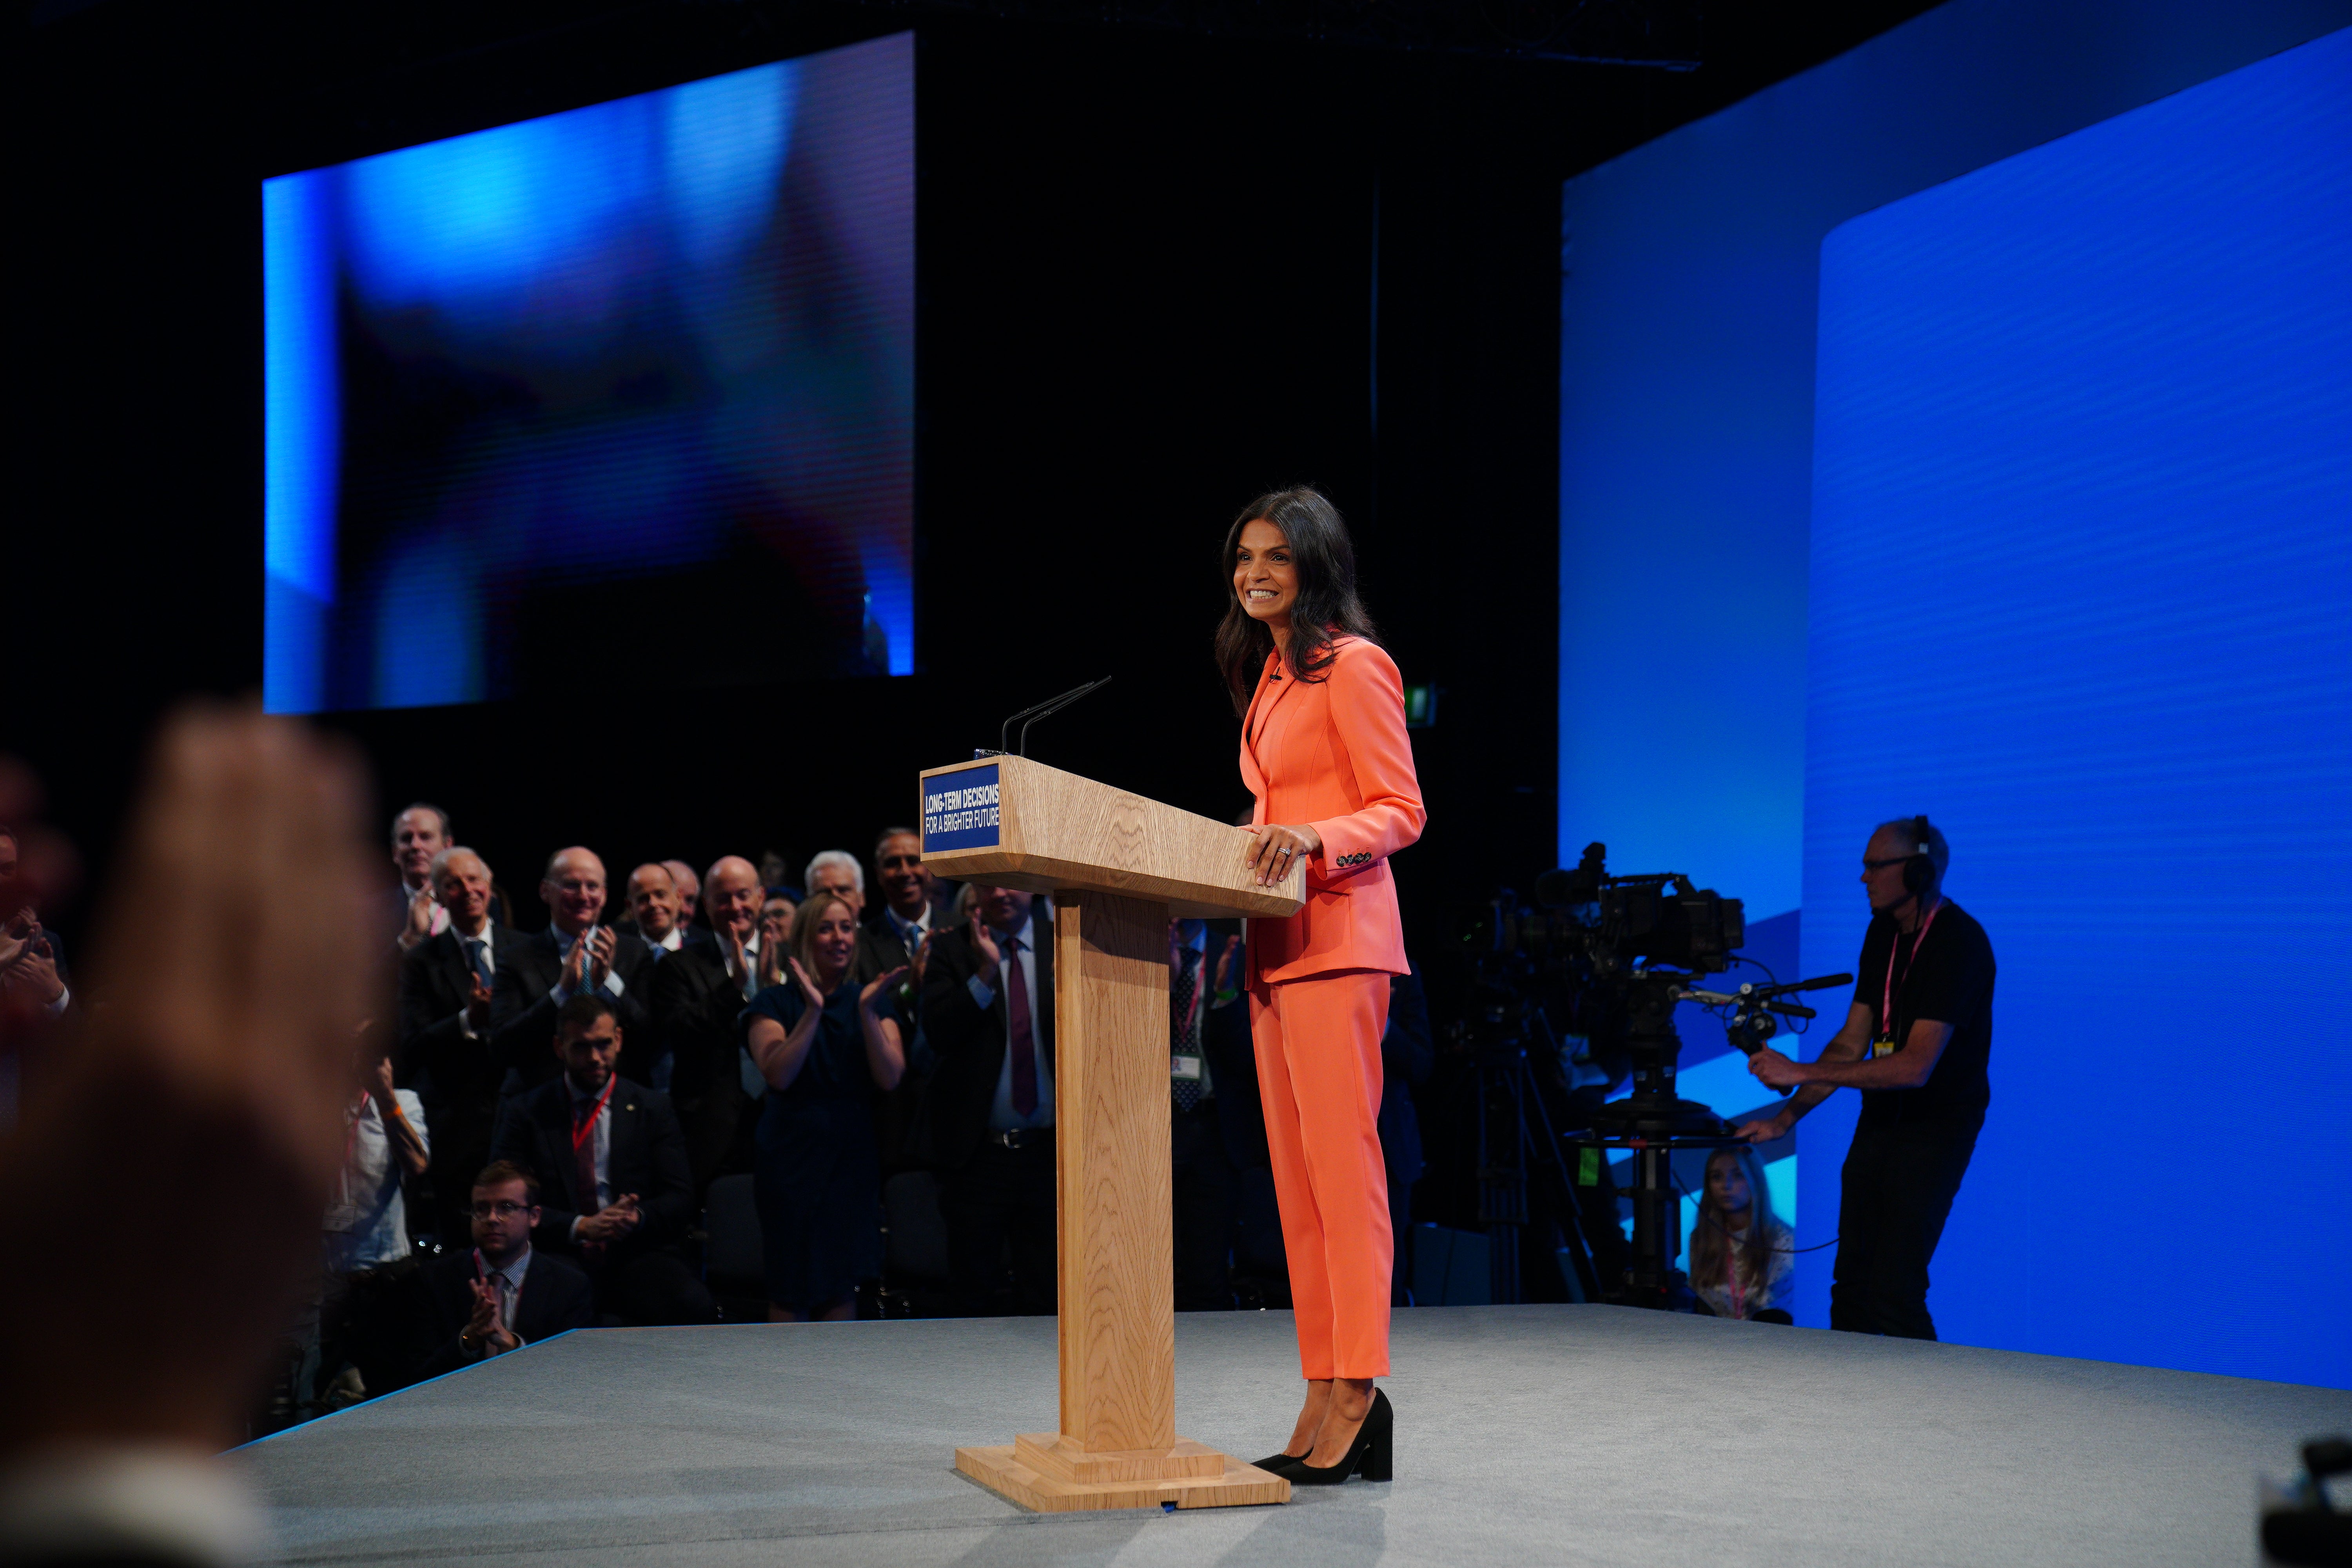 Akshata Murthy gave a surprise adress at the Tory party confernce